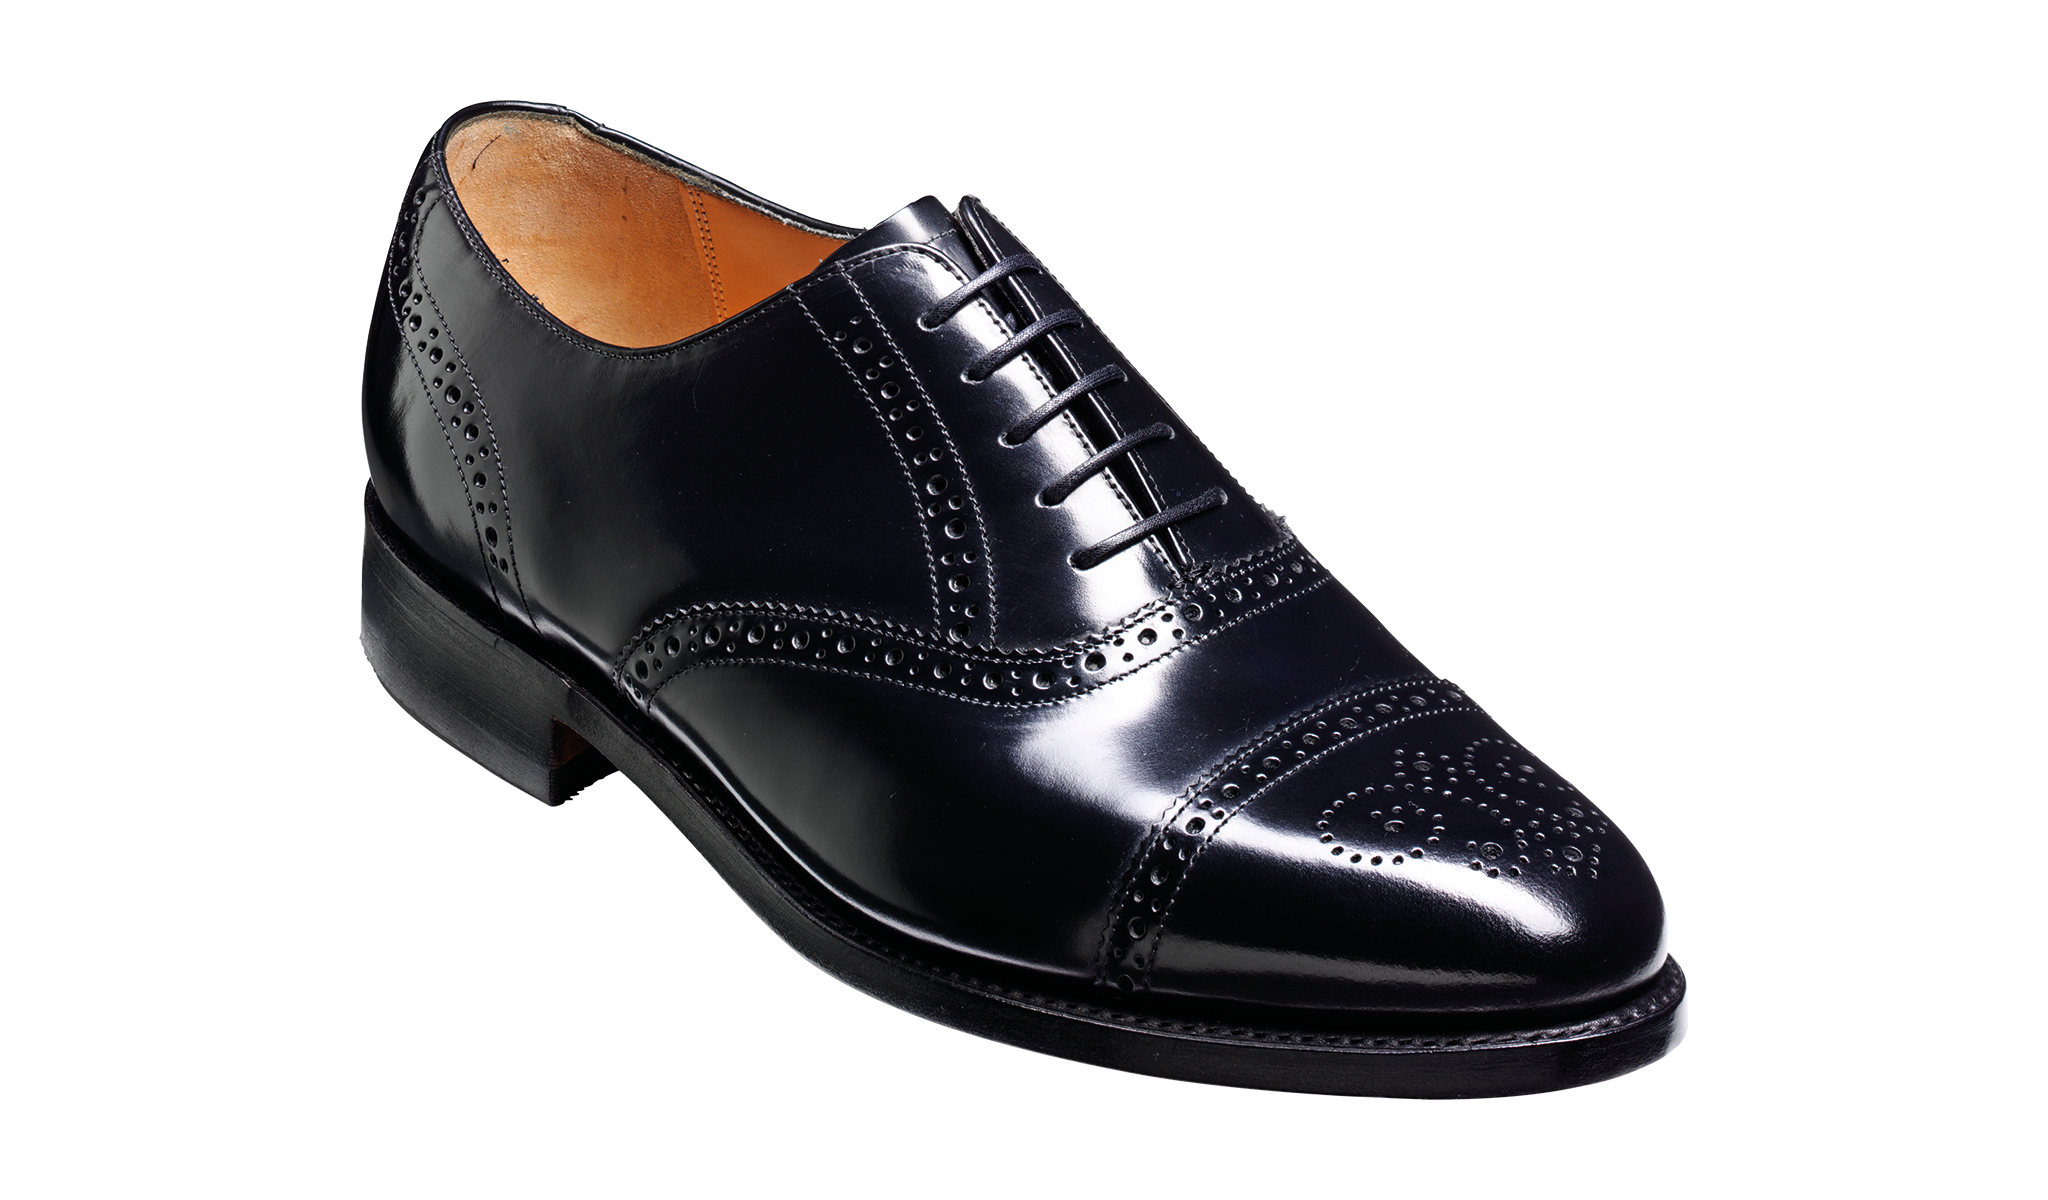 Alfred - Black oxford shoe from Barker.